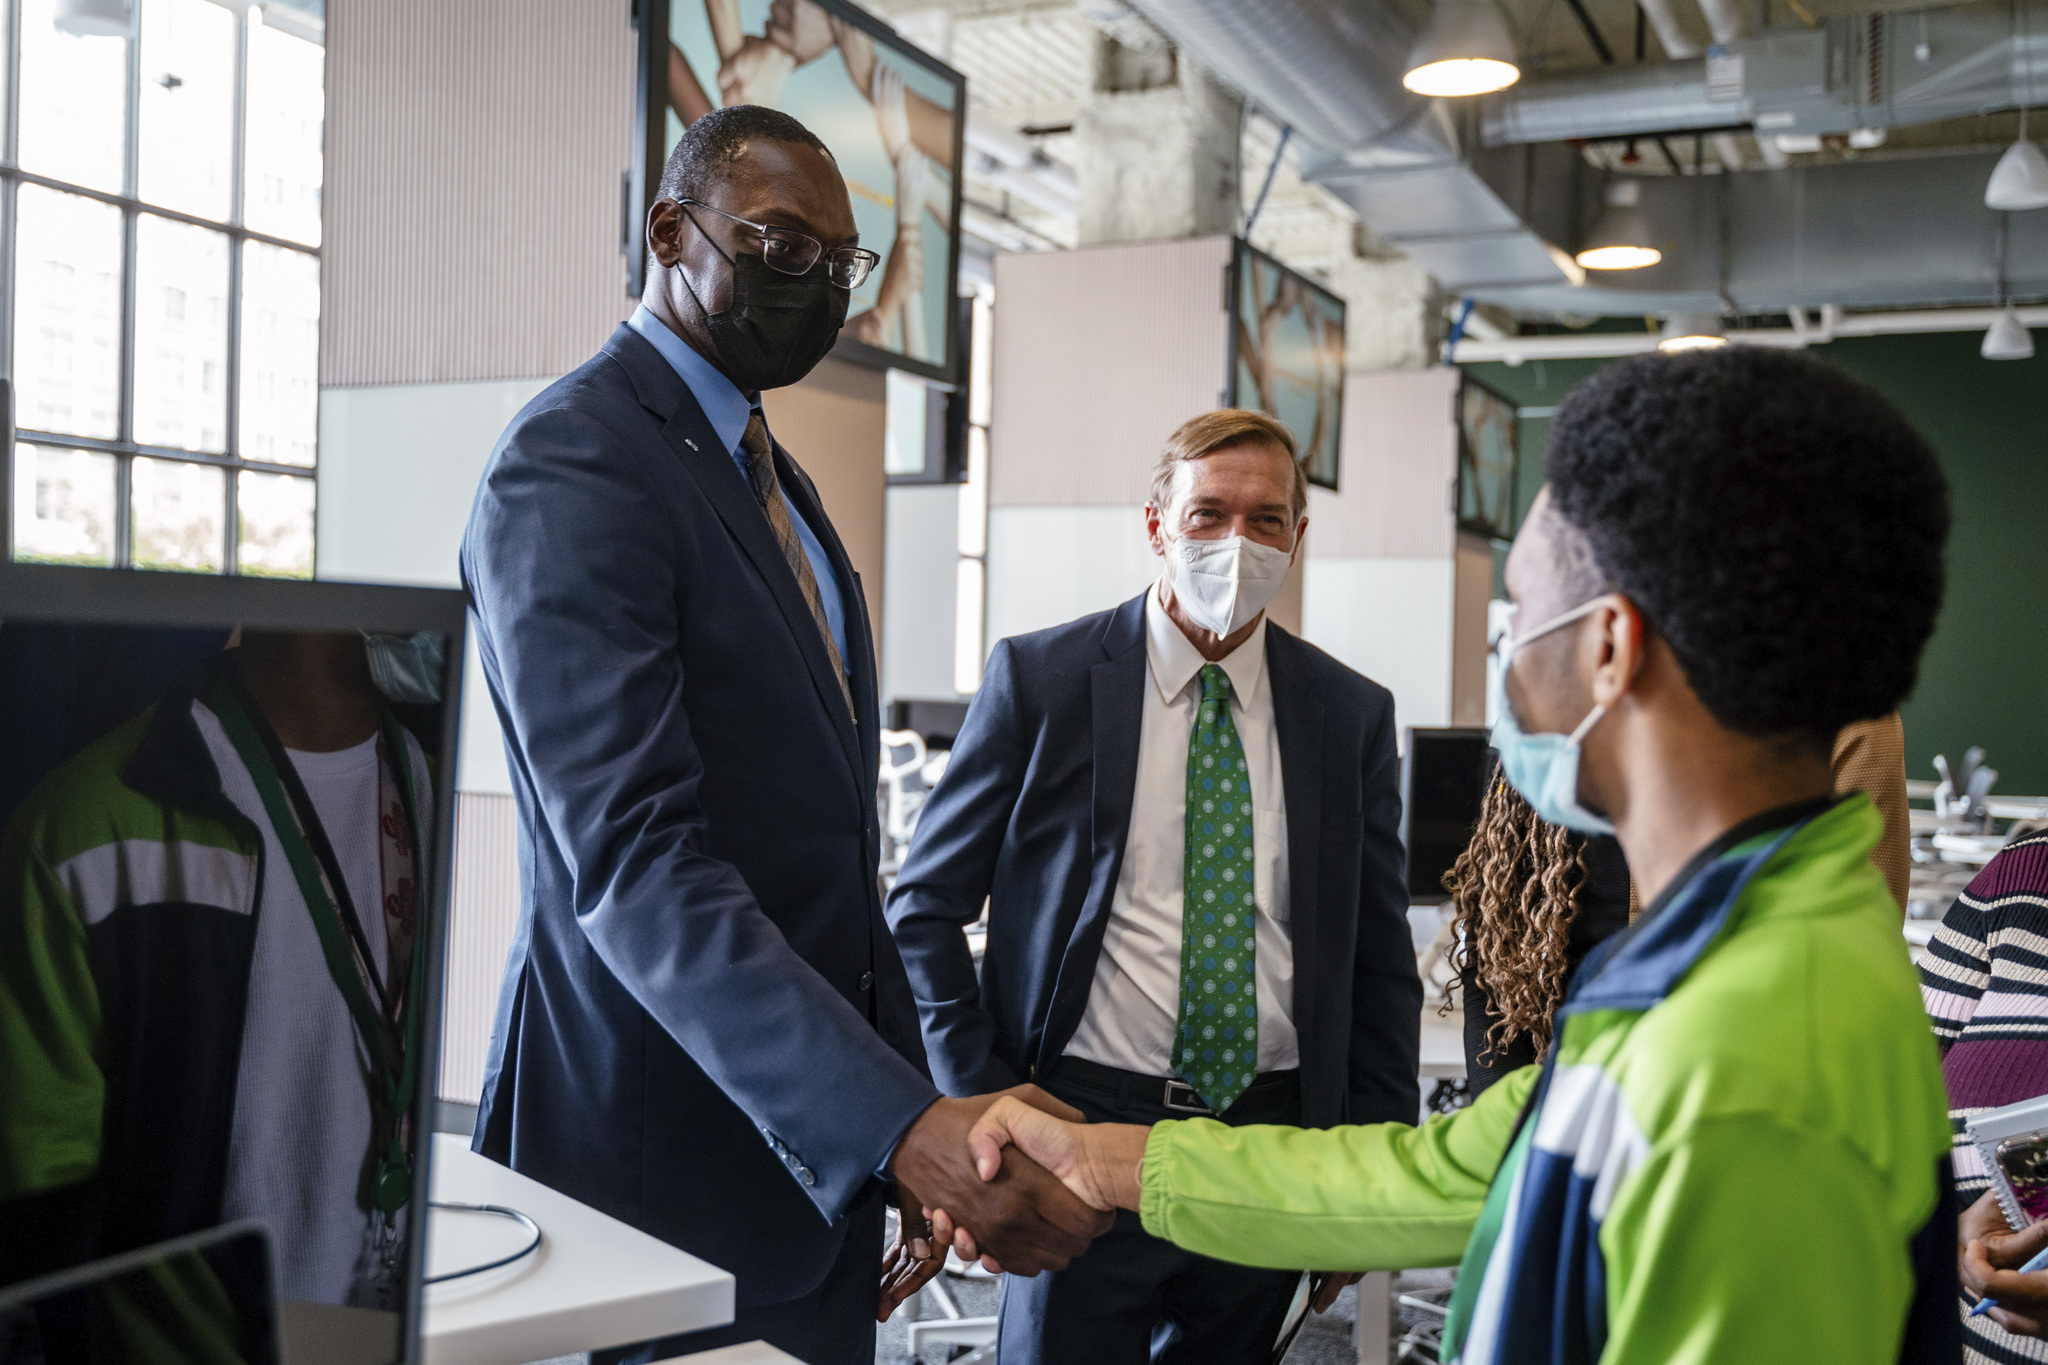 Michigan Lieutenant Governor Garlin Gilchrist and MSU Presidet Samuel L. Stanley, Jr., M.D. toured the Apple Developer Academy to explore the space, connect with students and learn about iOS curriculum (photo credit: Apple).